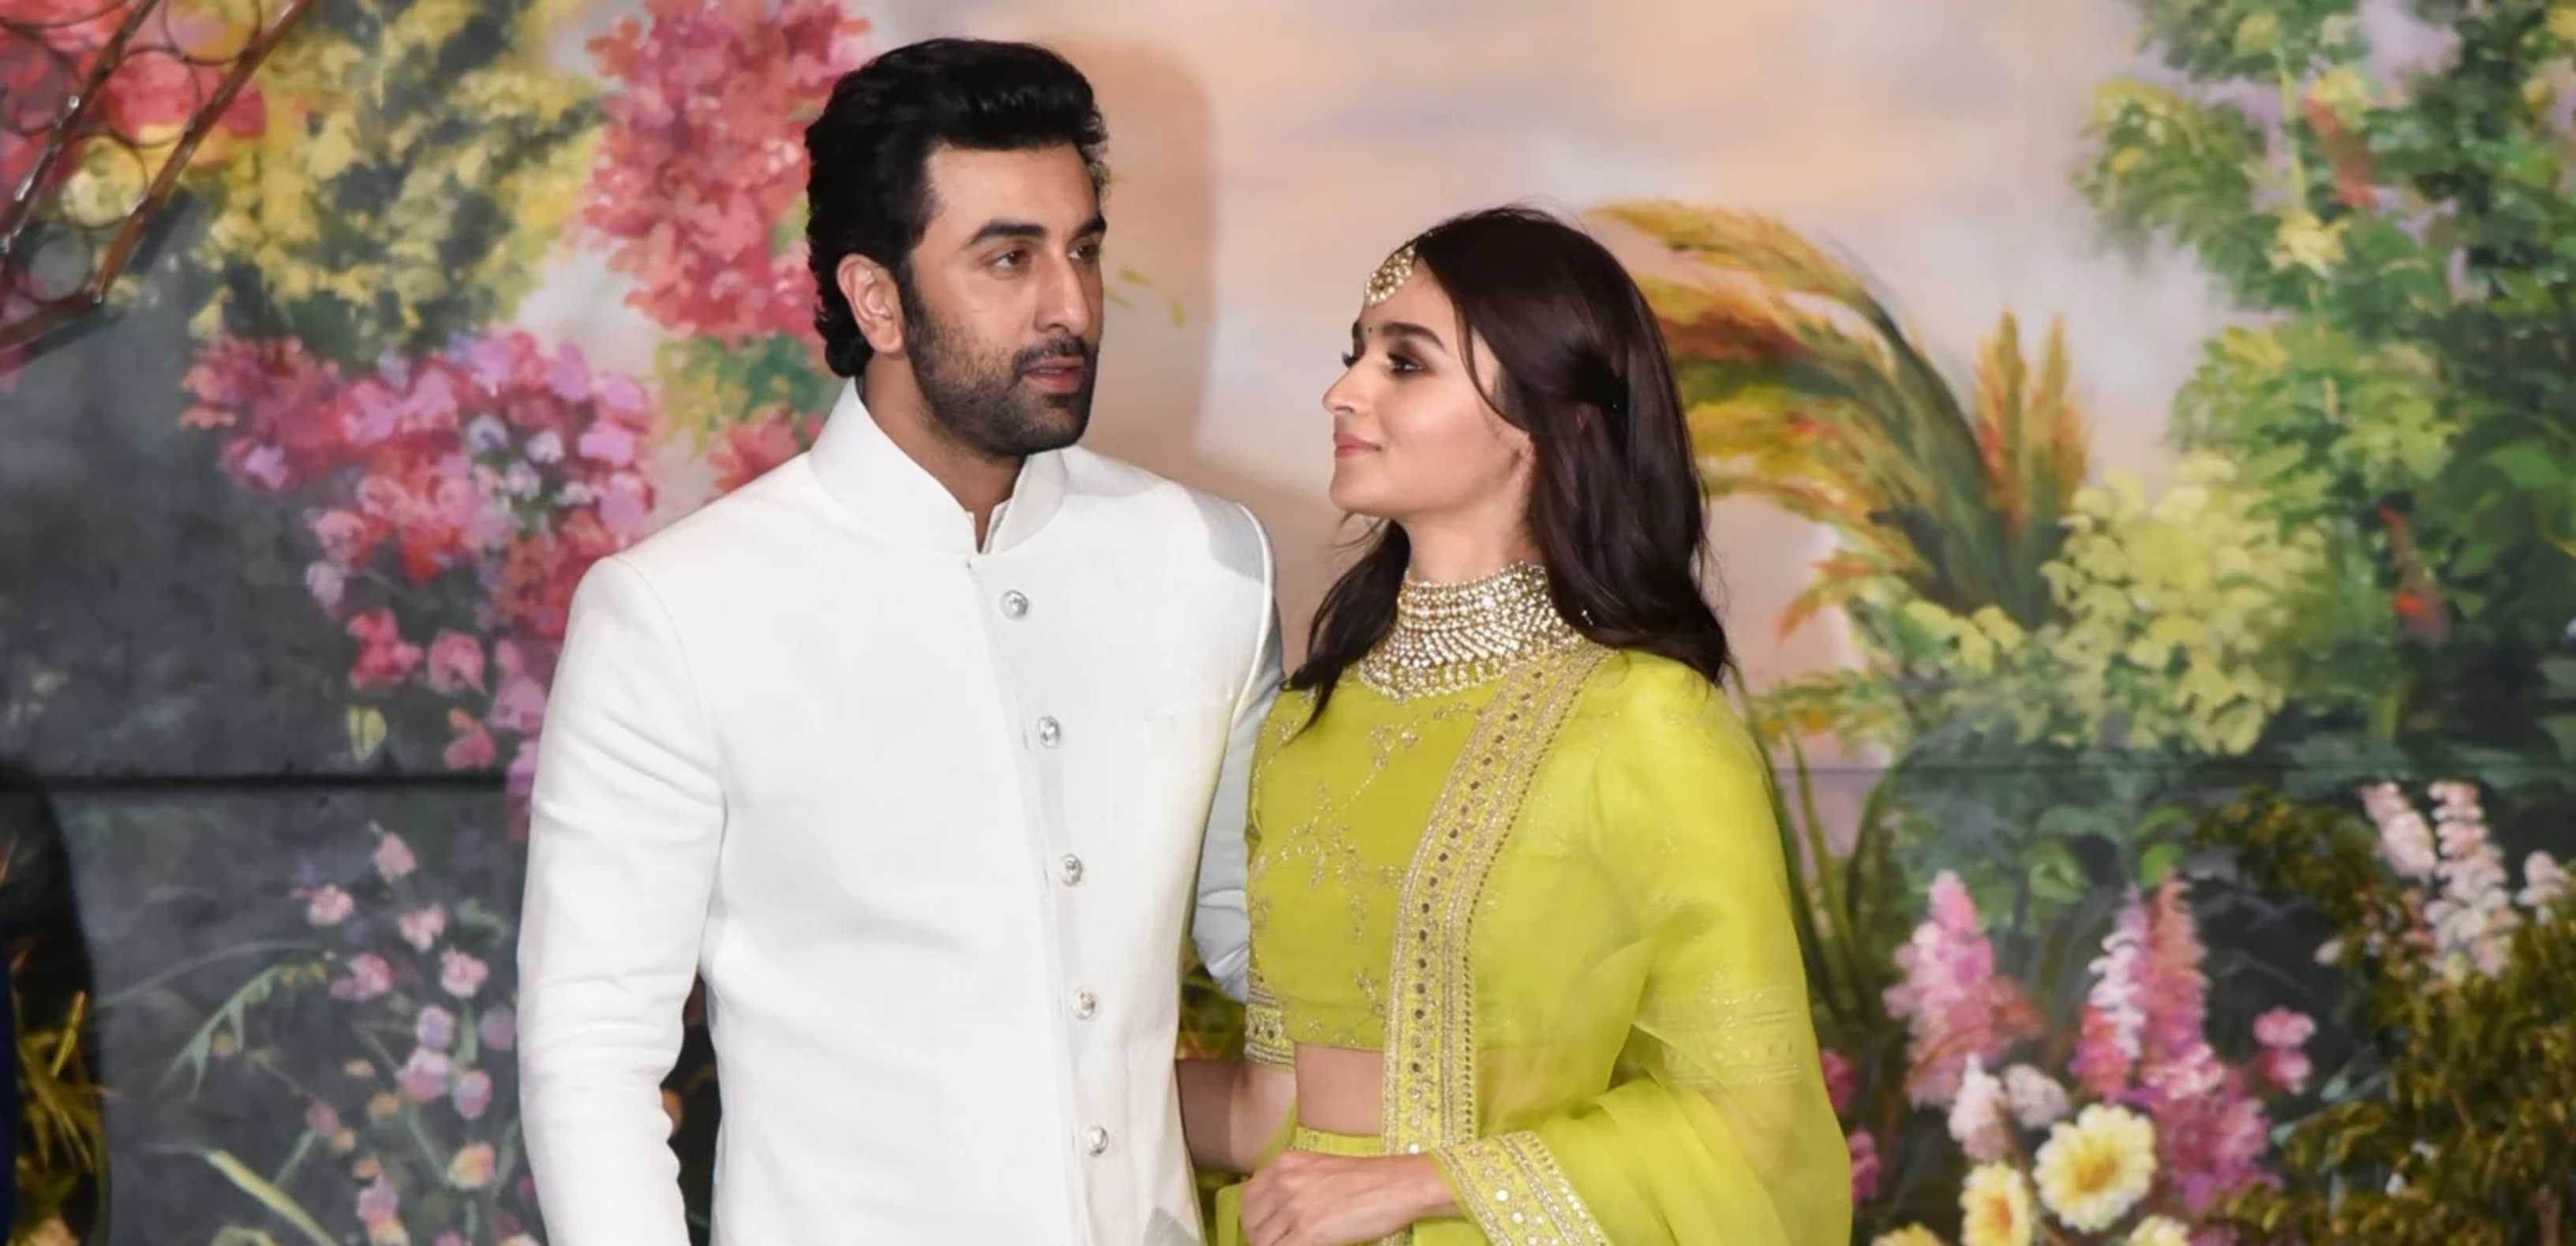 Alia Bhatt to tie the knot with beau Ranbir Kapoor in October, not April? Here’s what we know